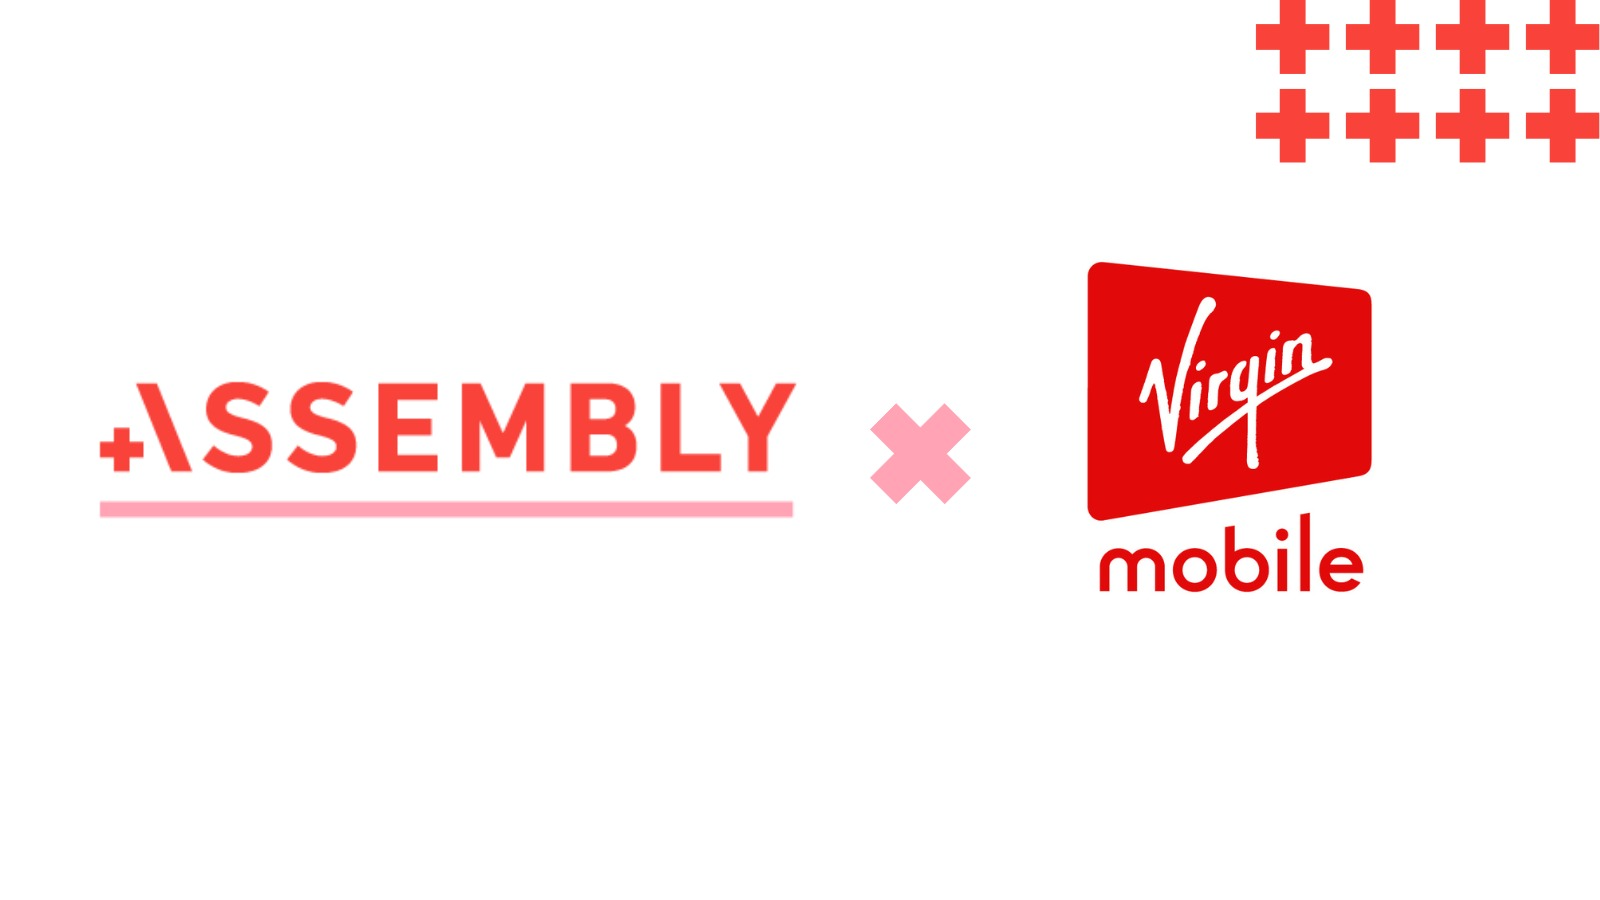 https://adgully.me/post/3267/assembly-wins-virgin-mobile-uae-account